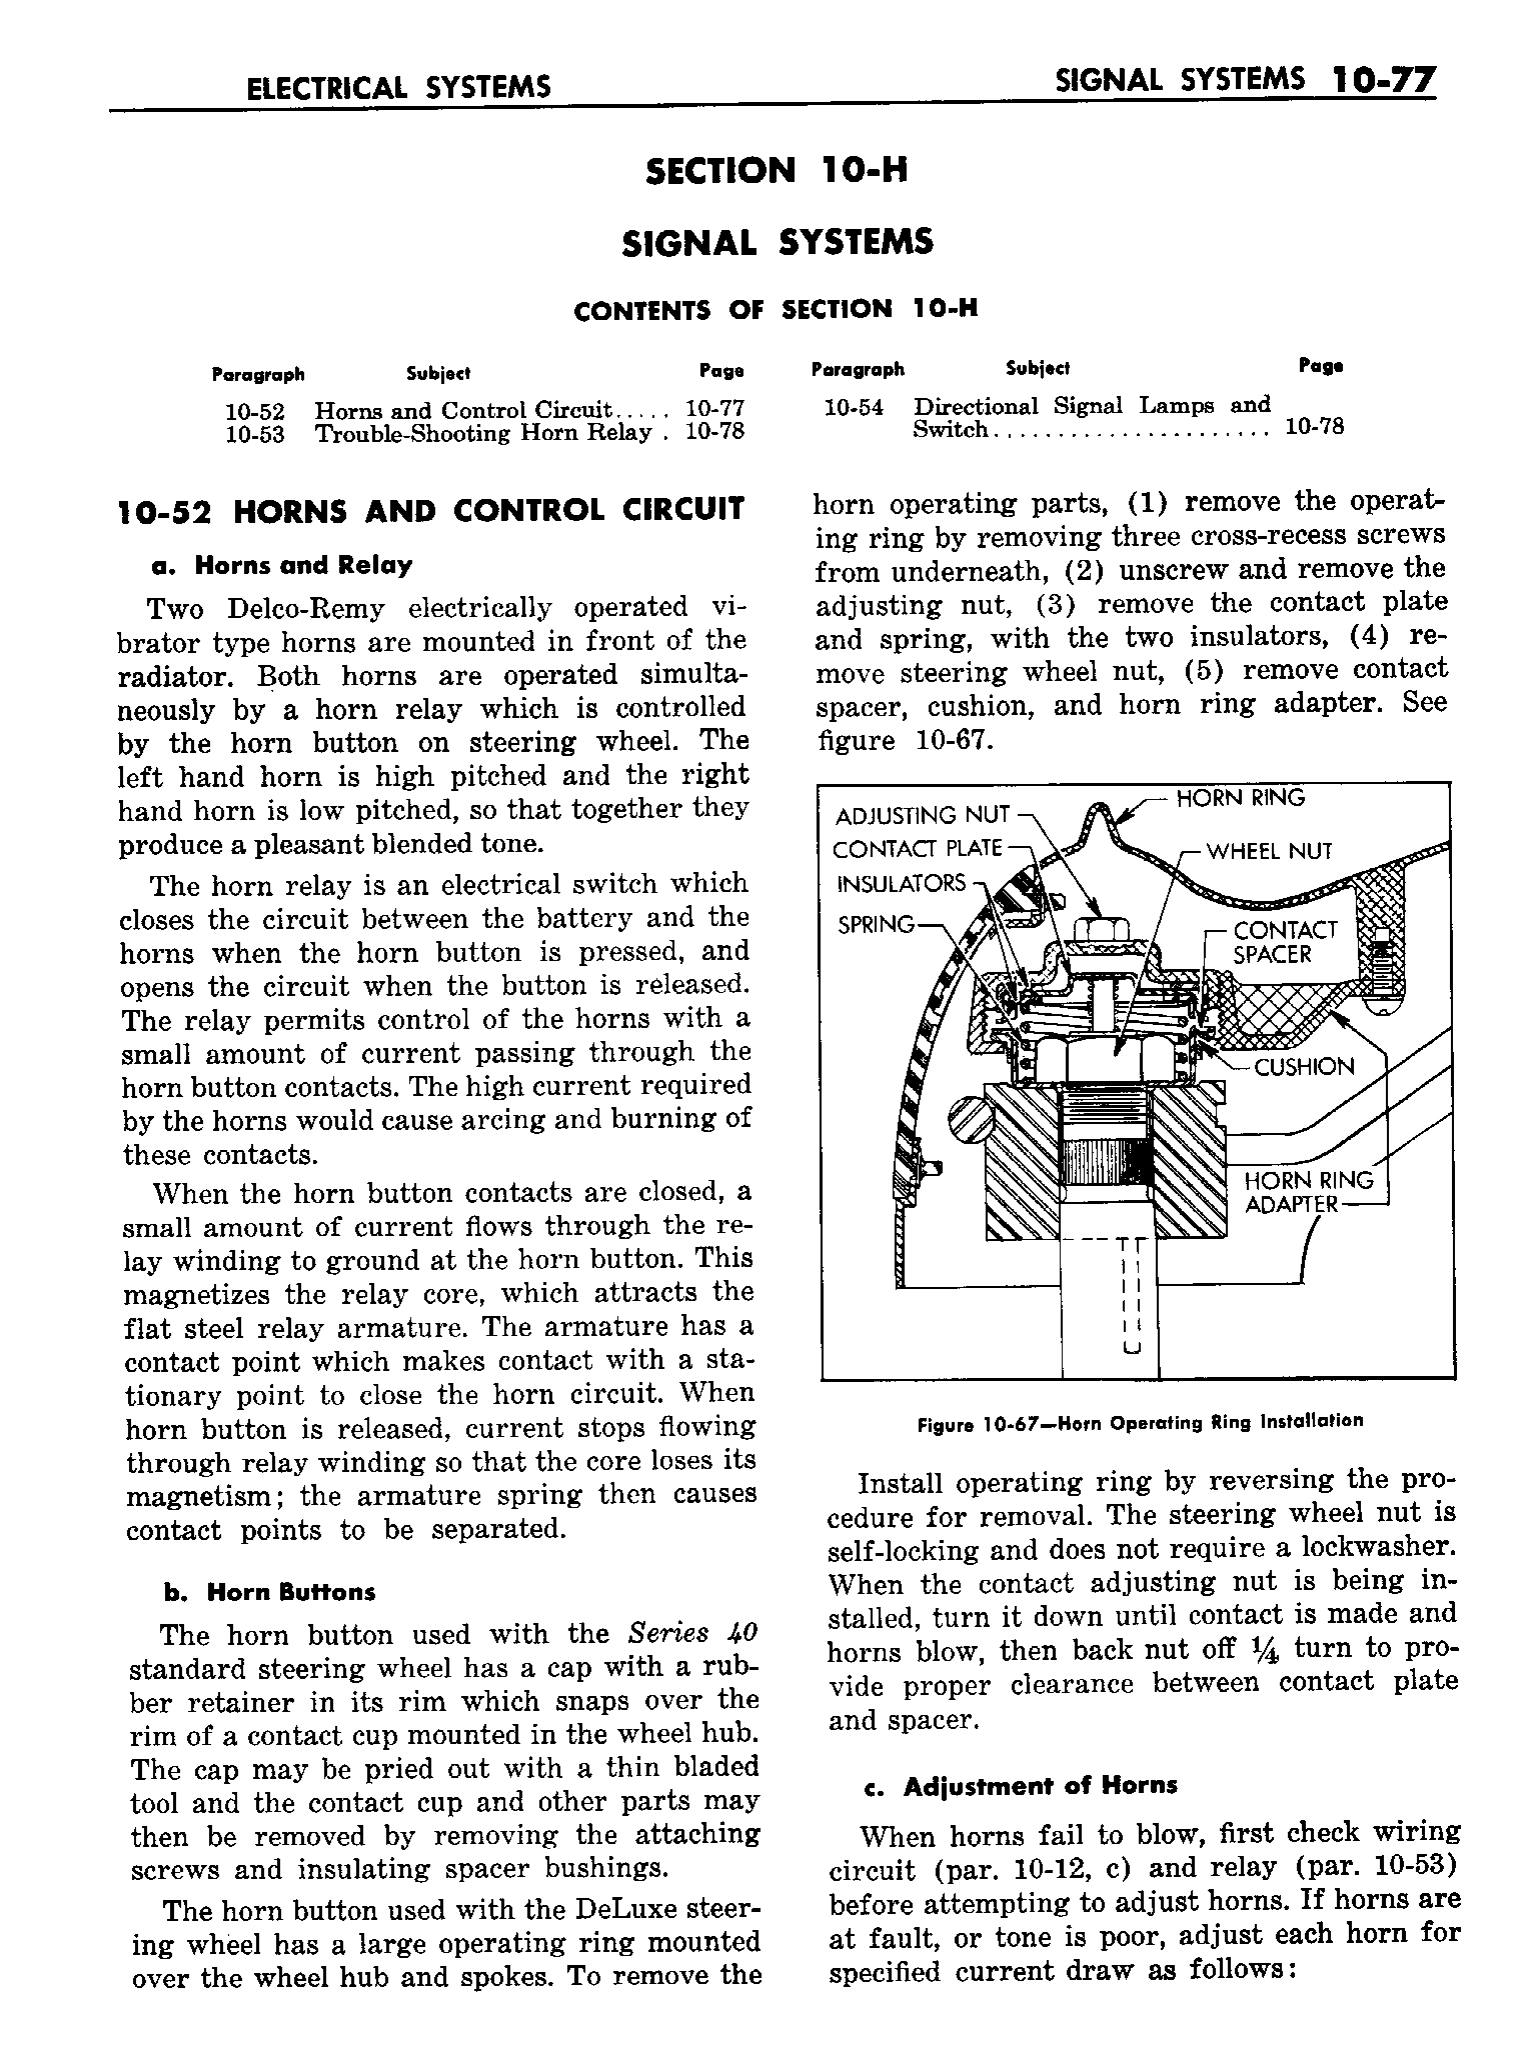 n_11 1958 Buick Shop Manual - Electrical Systems_77.jpg